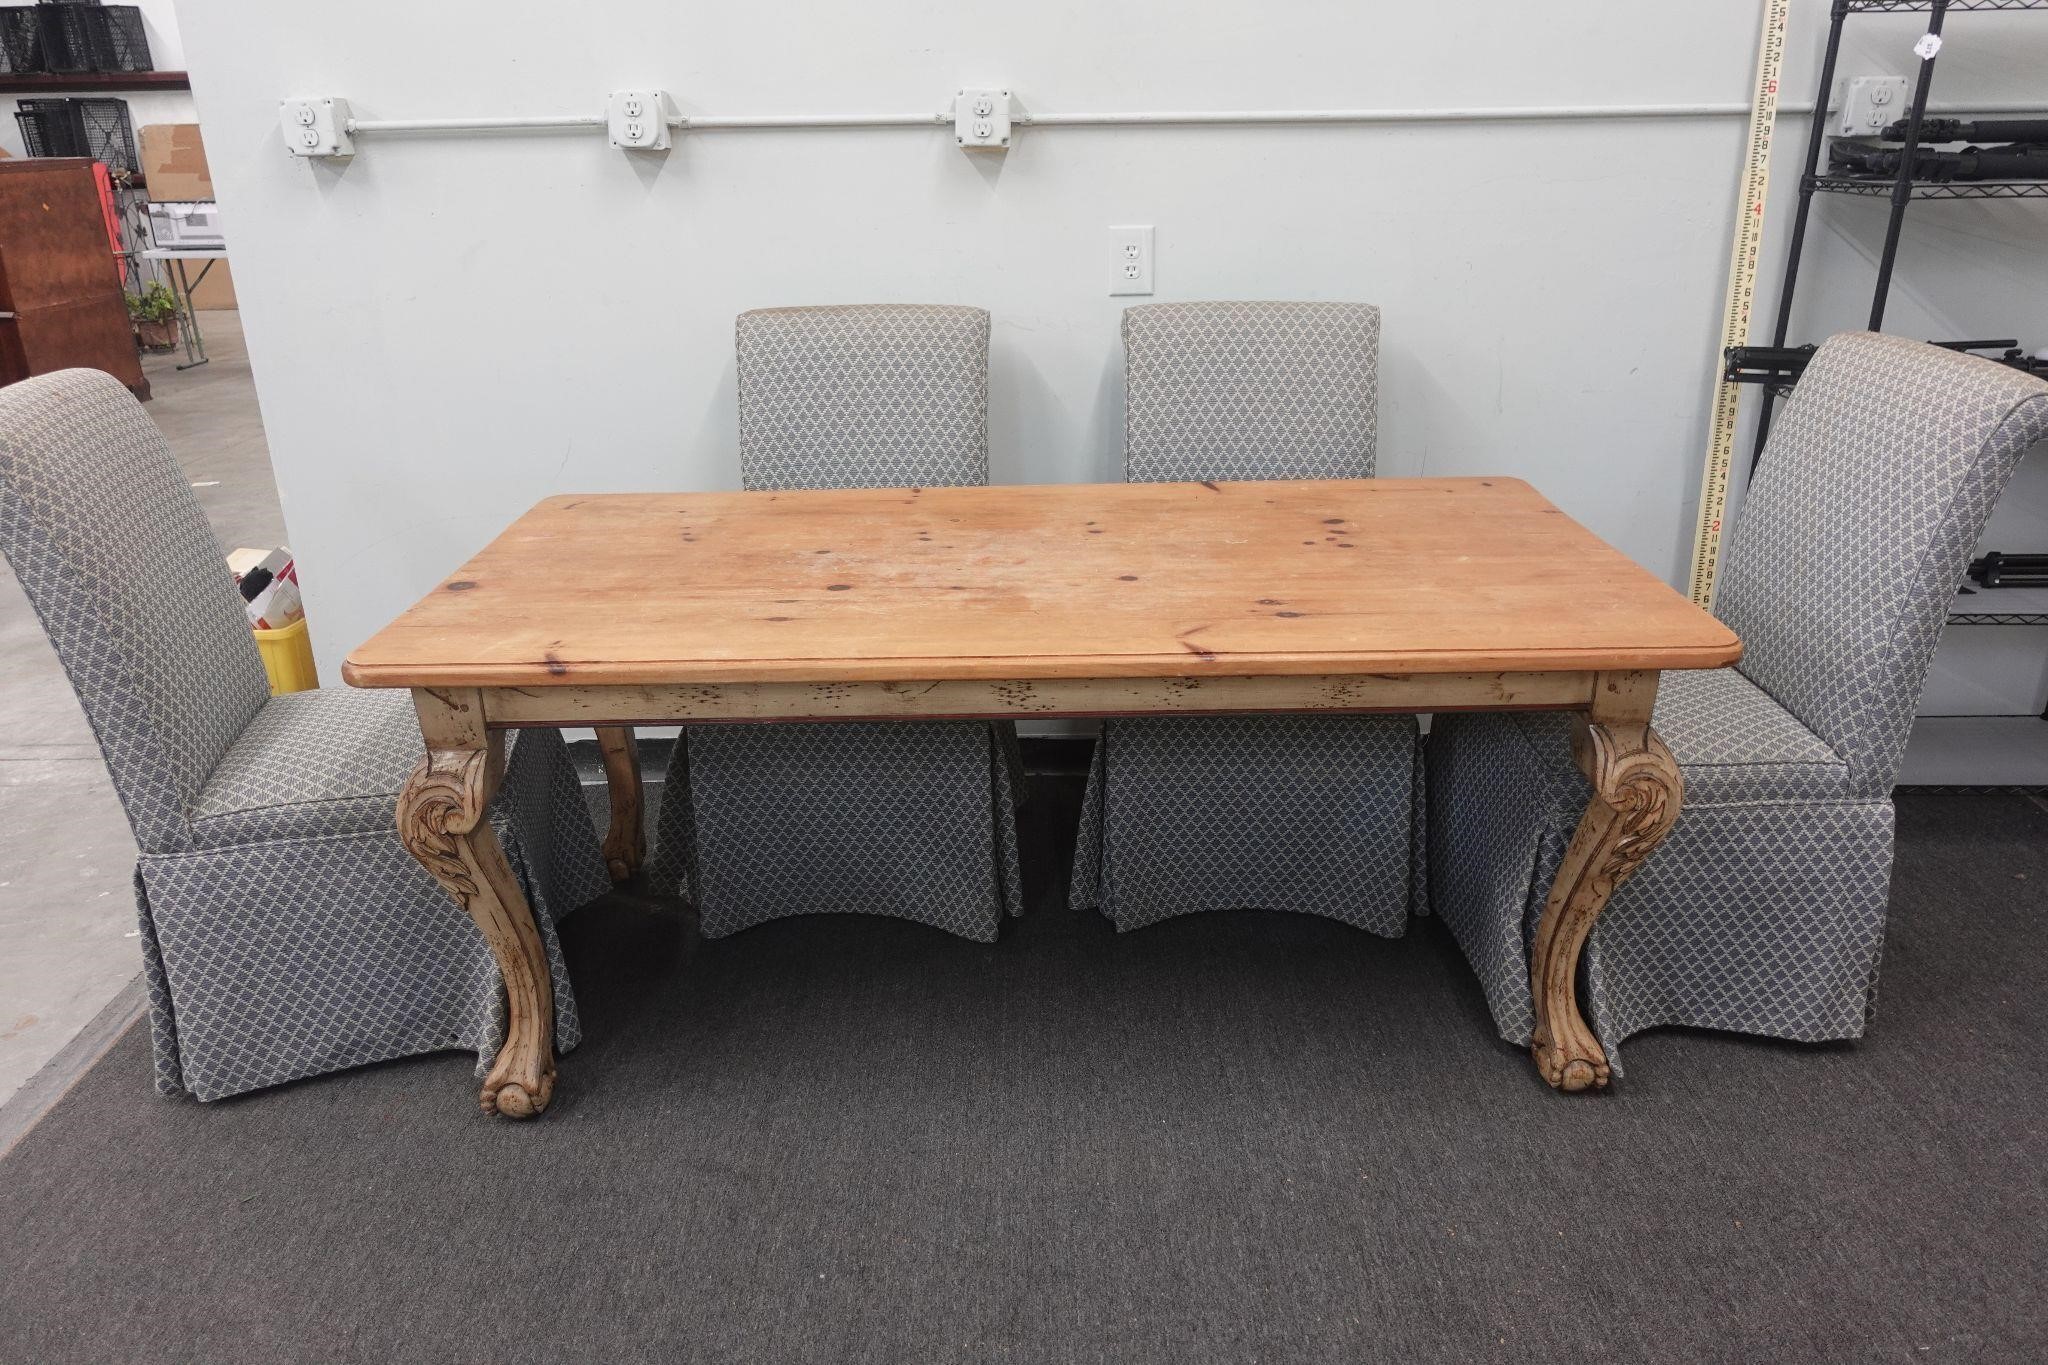 Dining Table w/ Carved Legs & 4 Upholstered Chairs